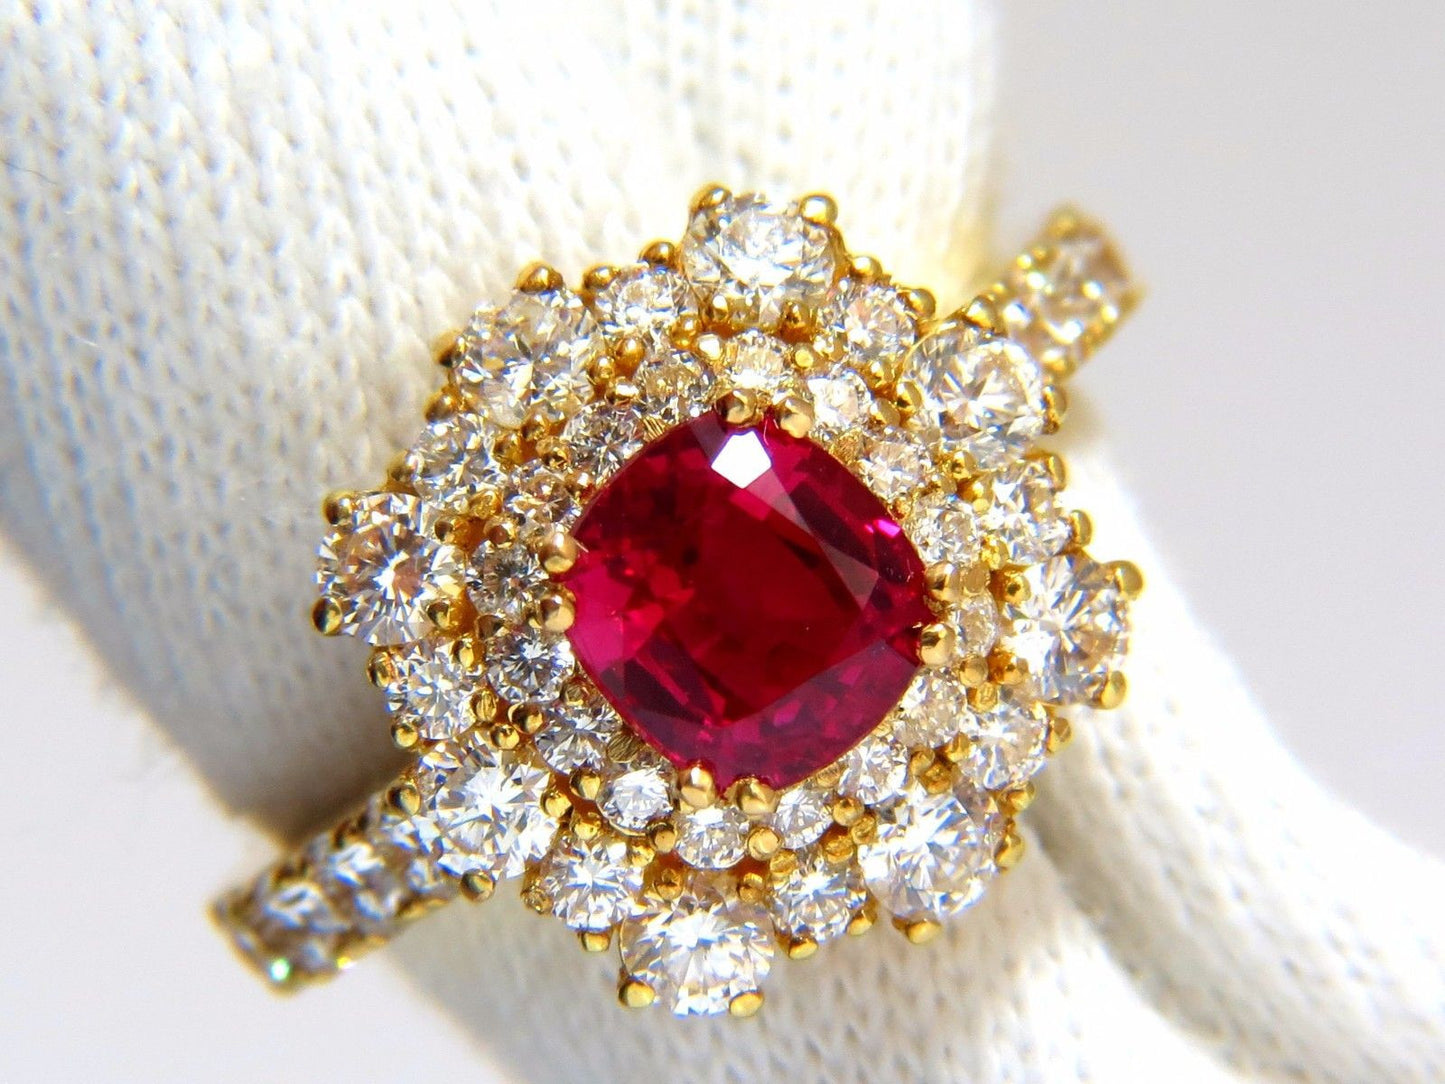 GIA Certified 3.24ct red origin ruby diamonds ring 18kt cocktail petite